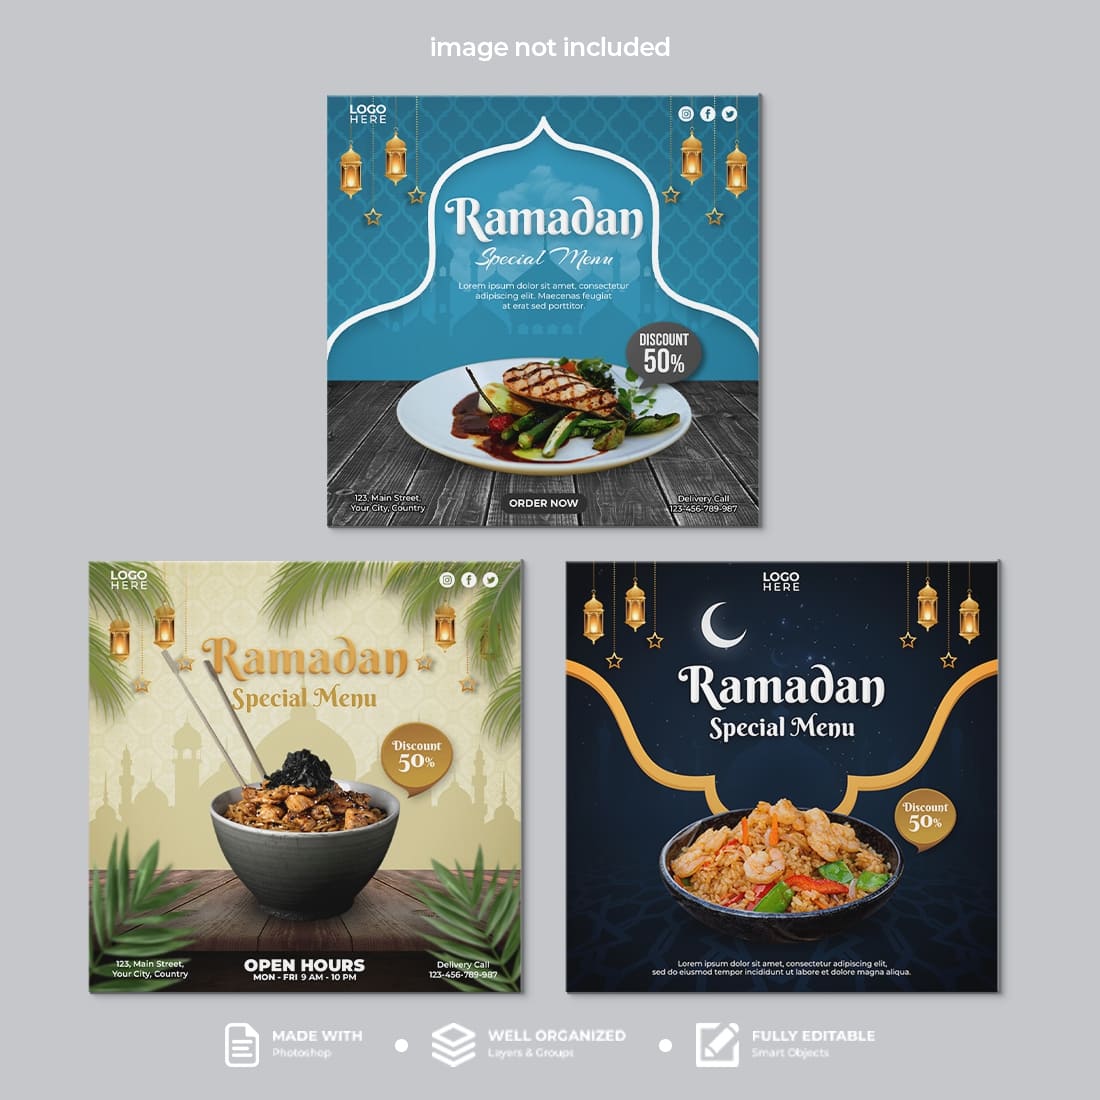 Social Media Post Template Collection For Ramadan Special Menu – Only $6 cover image.